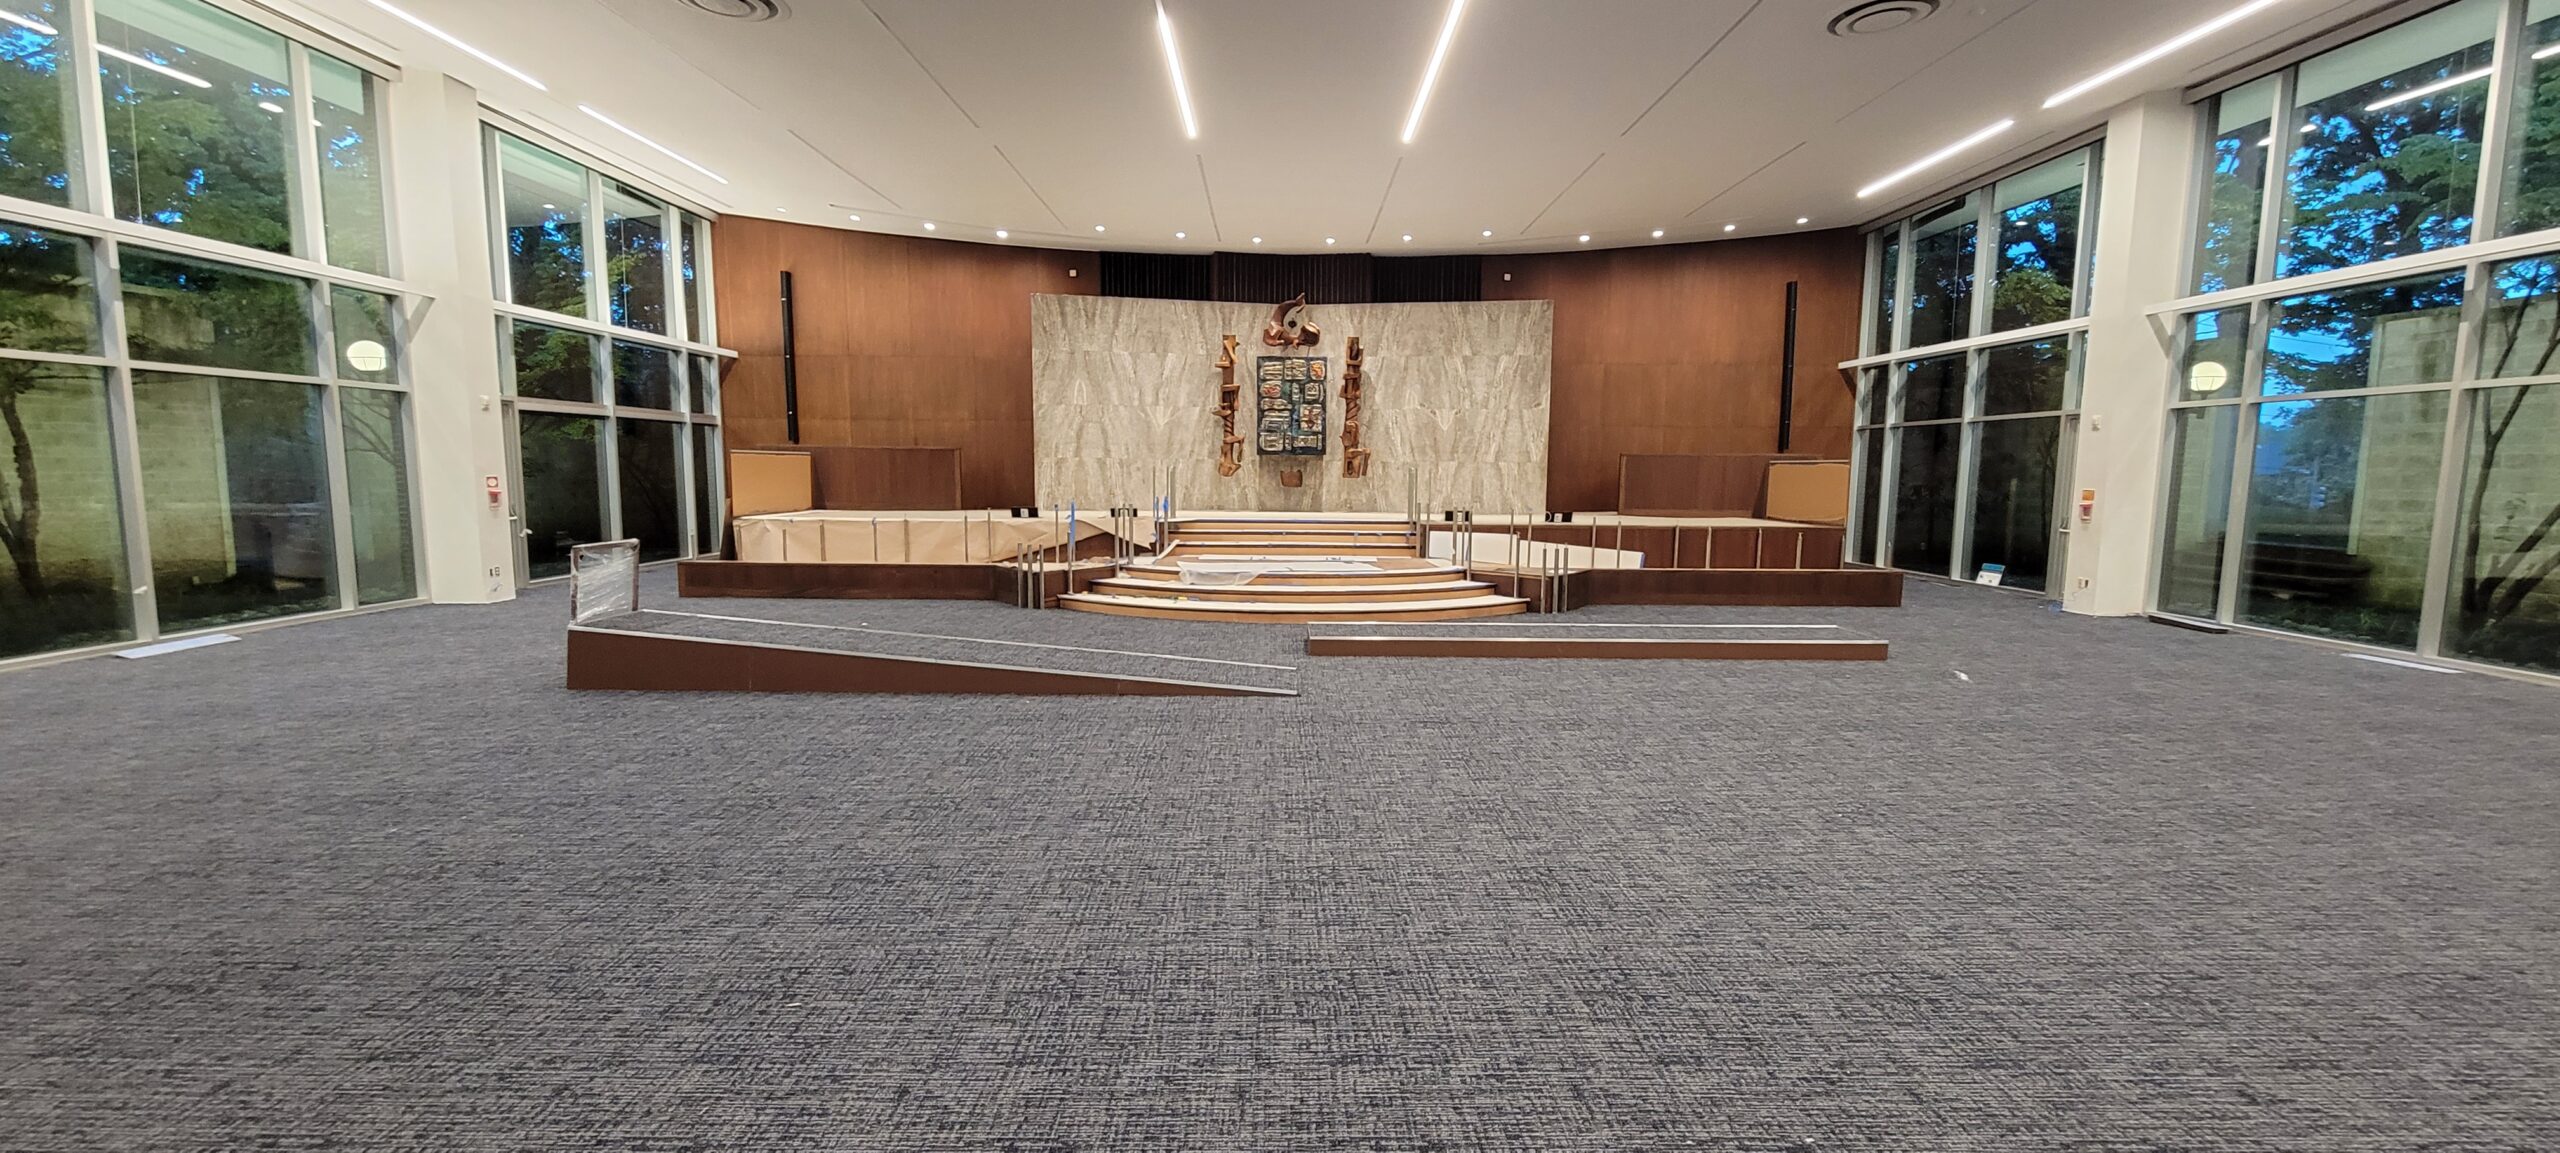 9 1 2021 Sanctuary with carpeting 2